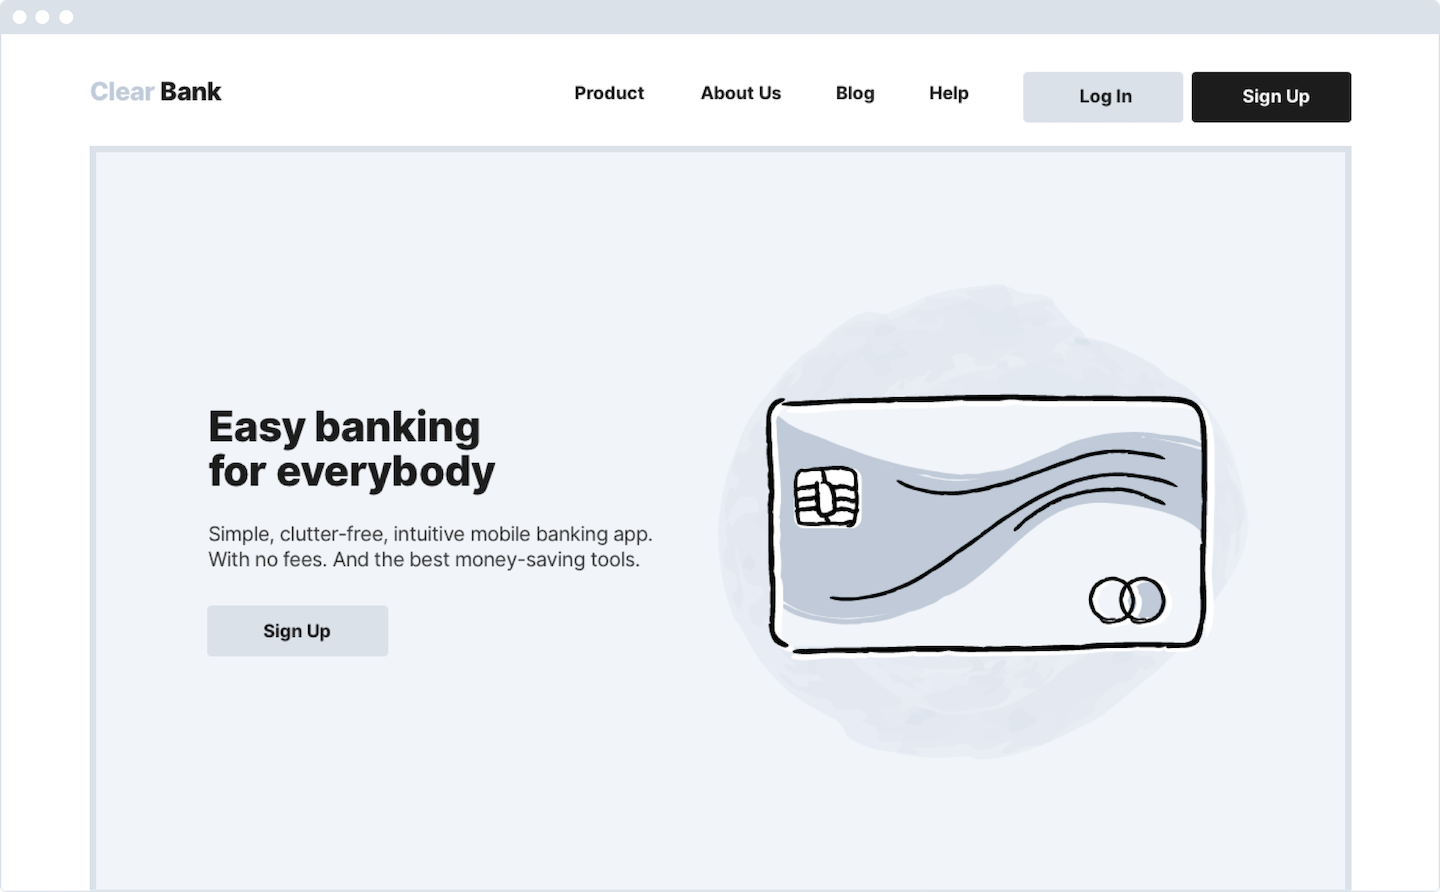 An example of a page on the Clear Bank website.